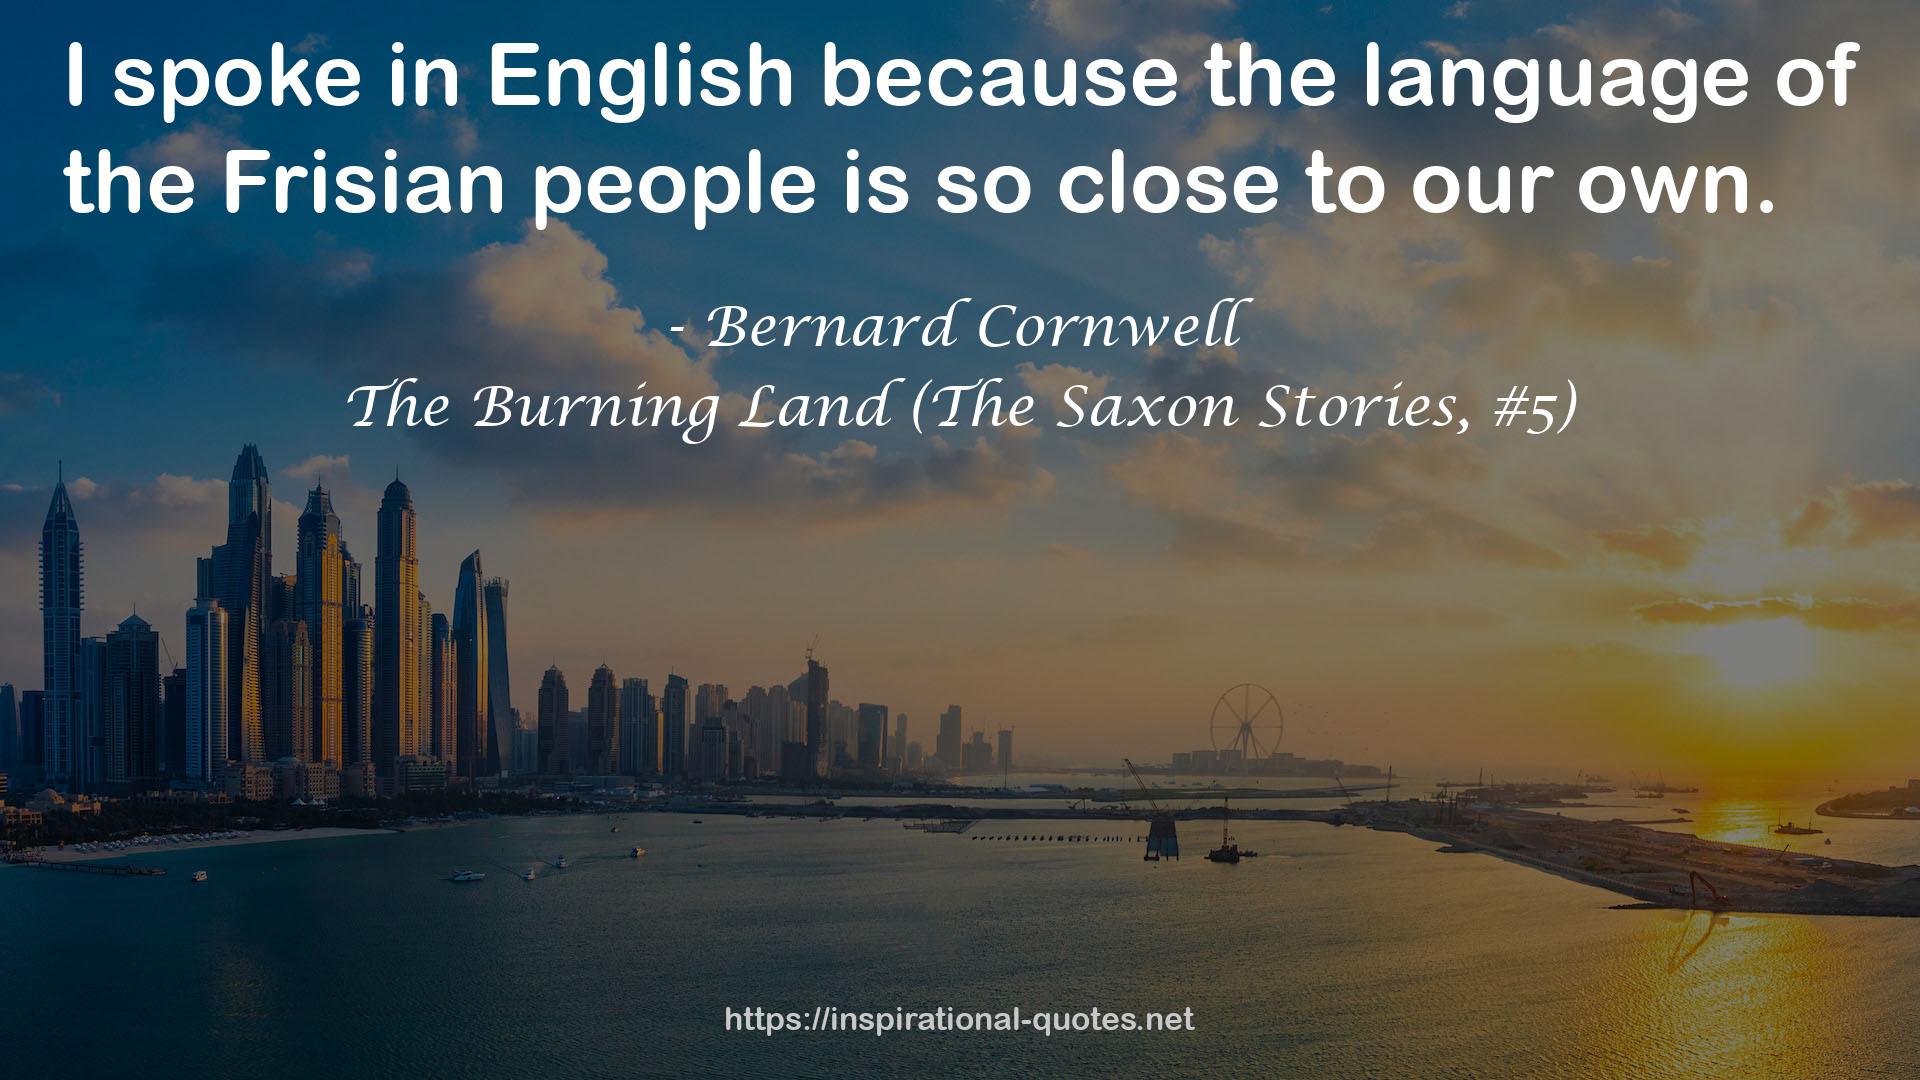 The Burning Land (The Saxon Stories, #5) QUOTES